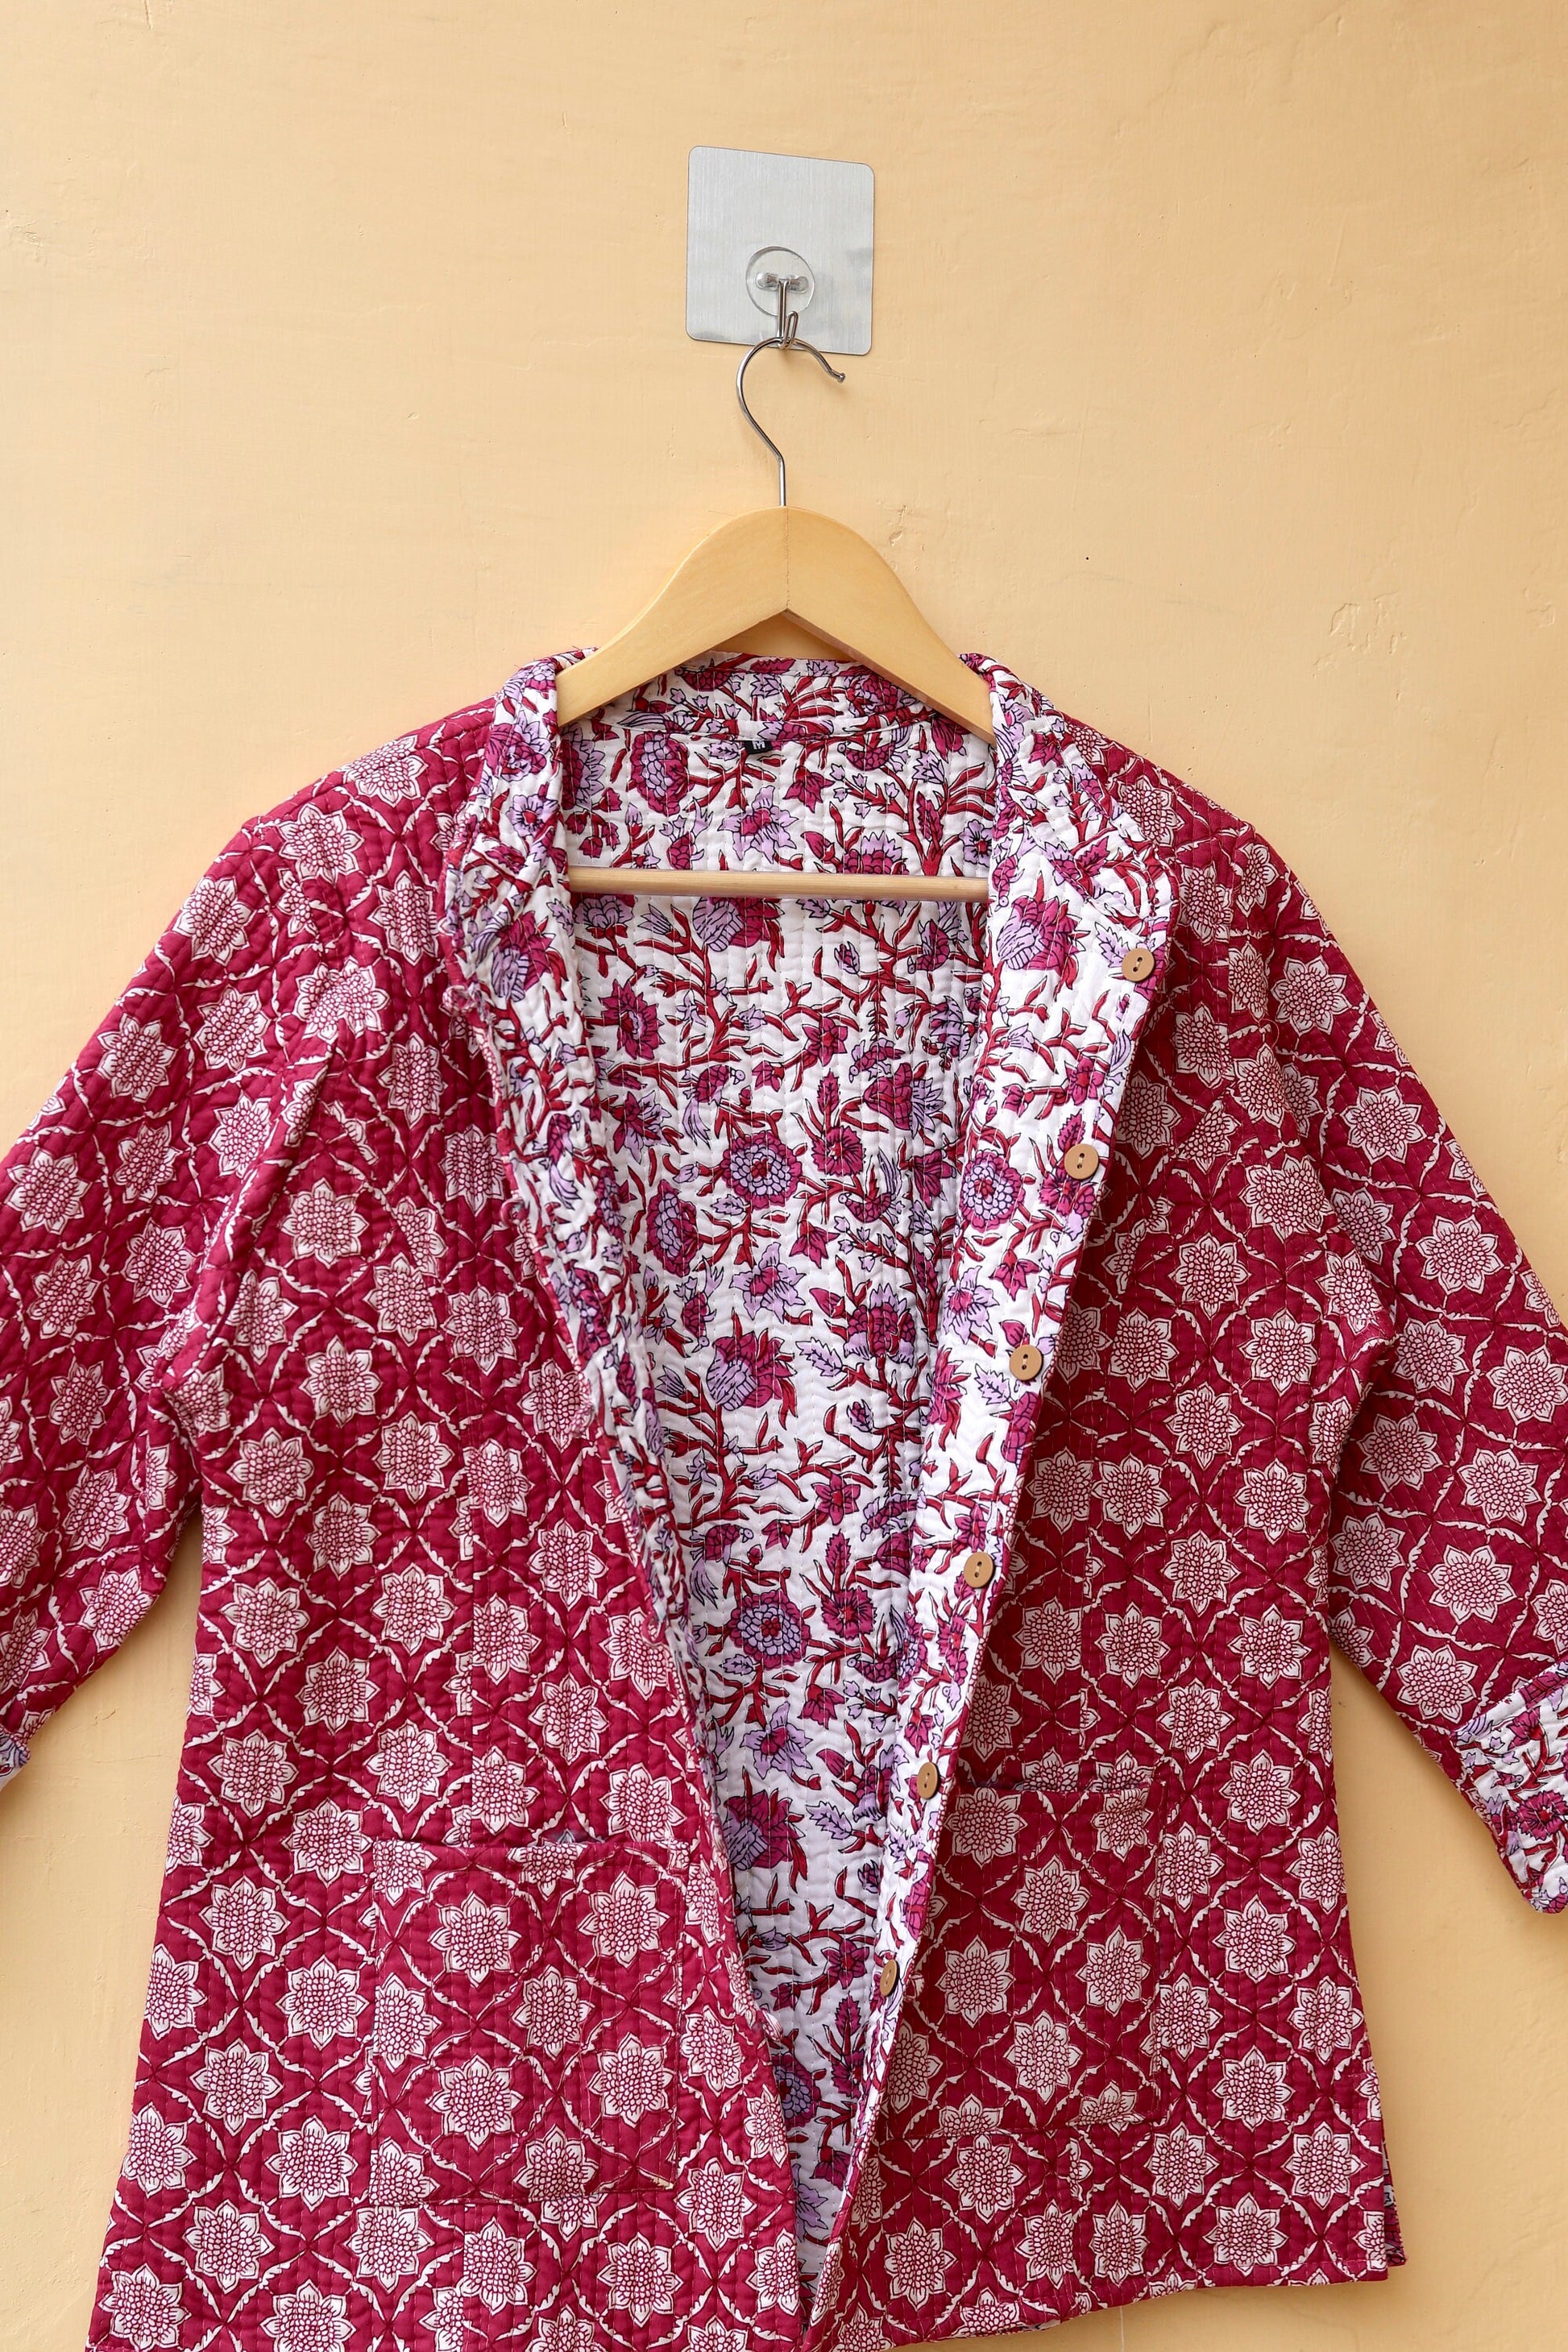 Kantha Quilted Cotton Jacket Stylish Red Floral Women's Coat, Indian Handmade Reversible Waistcoat for Her